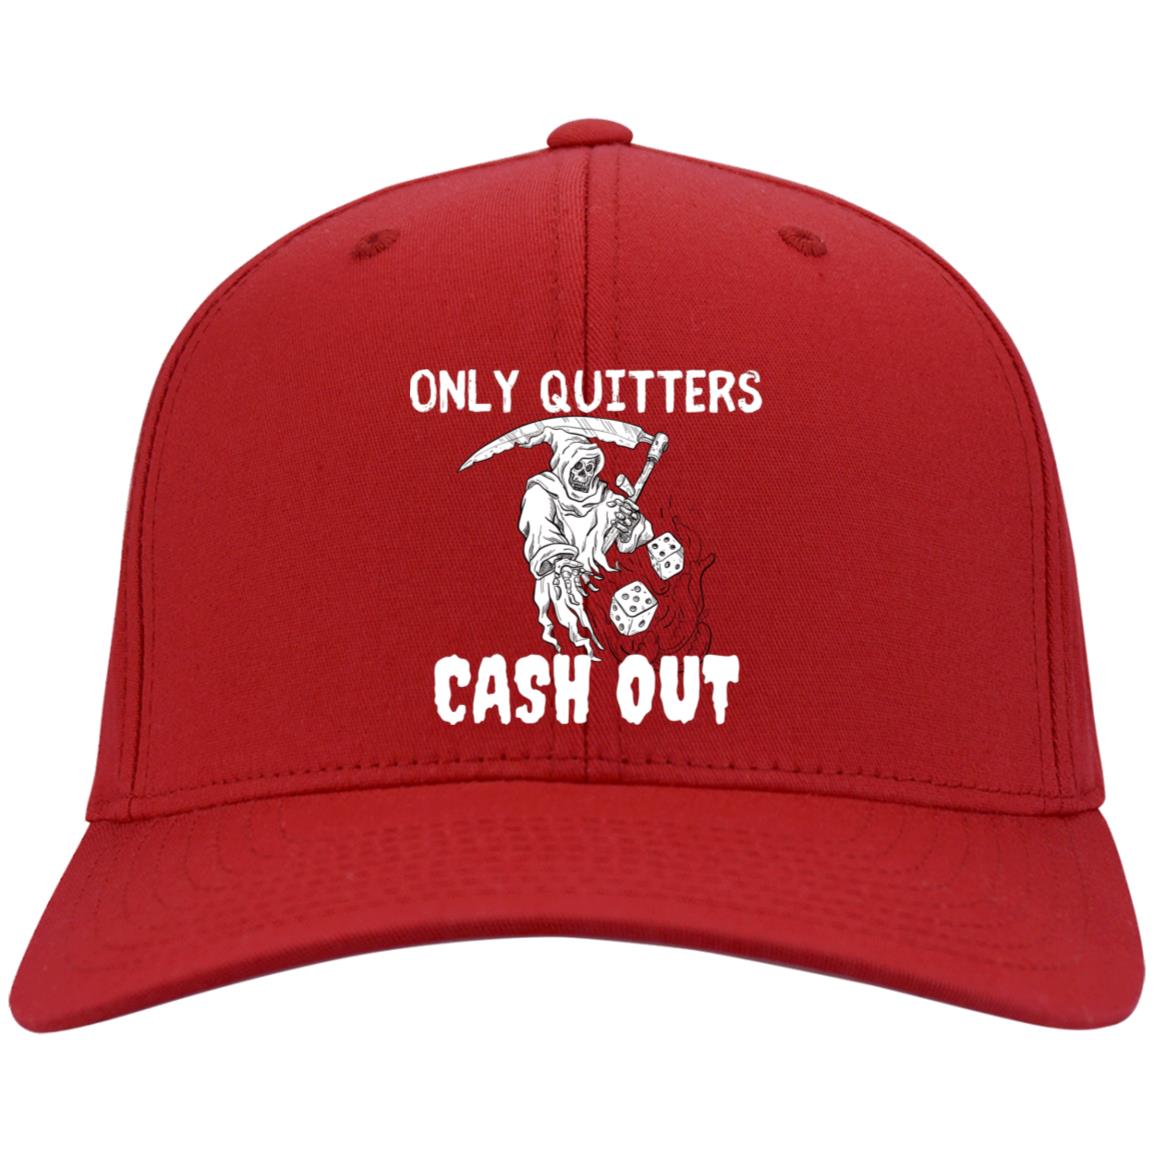 Only Quitters Cash Out Gambling Casino Las Vegas Twill Cap